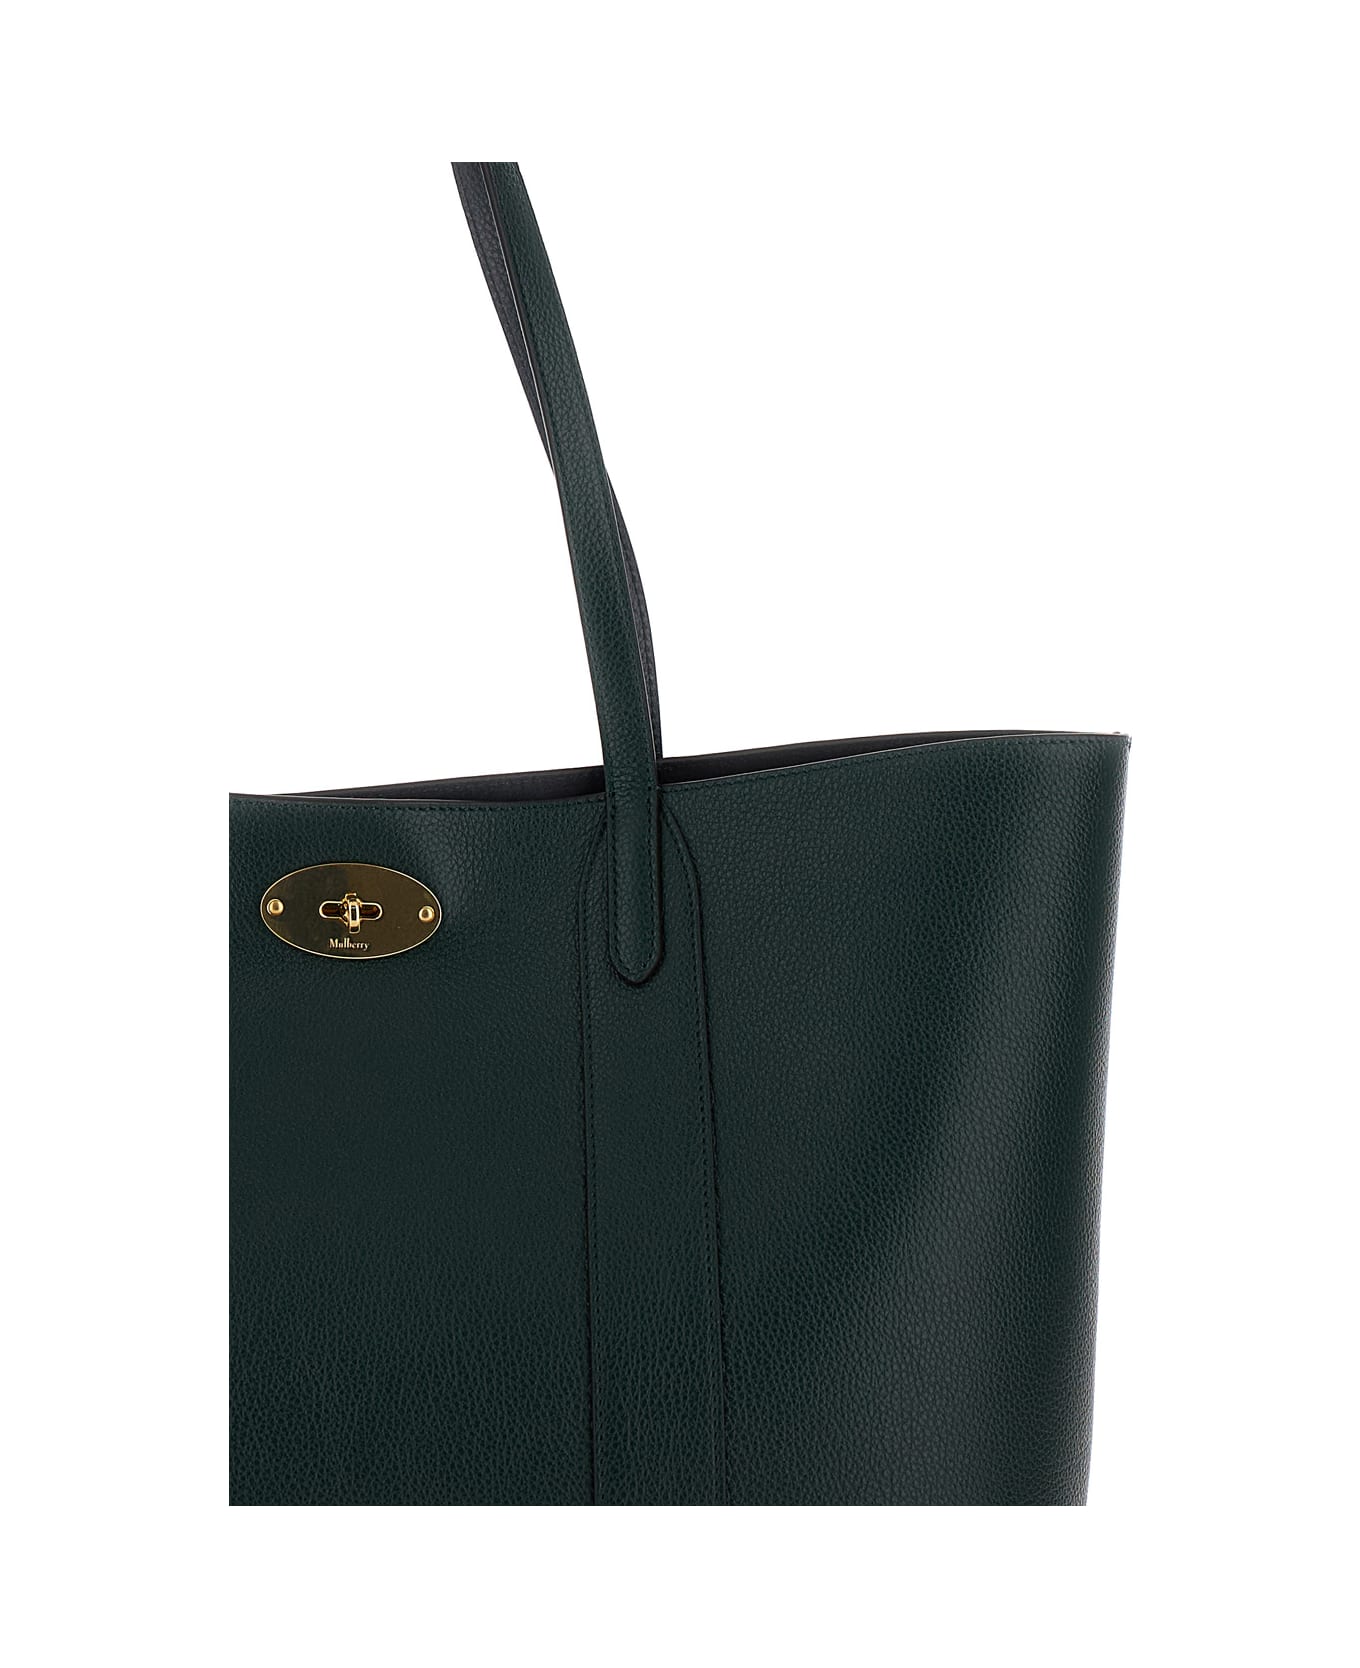 Mulberry 'bayswater Small' Green Tote Bag With Postman's Lock Closure In Leather Woman - Green